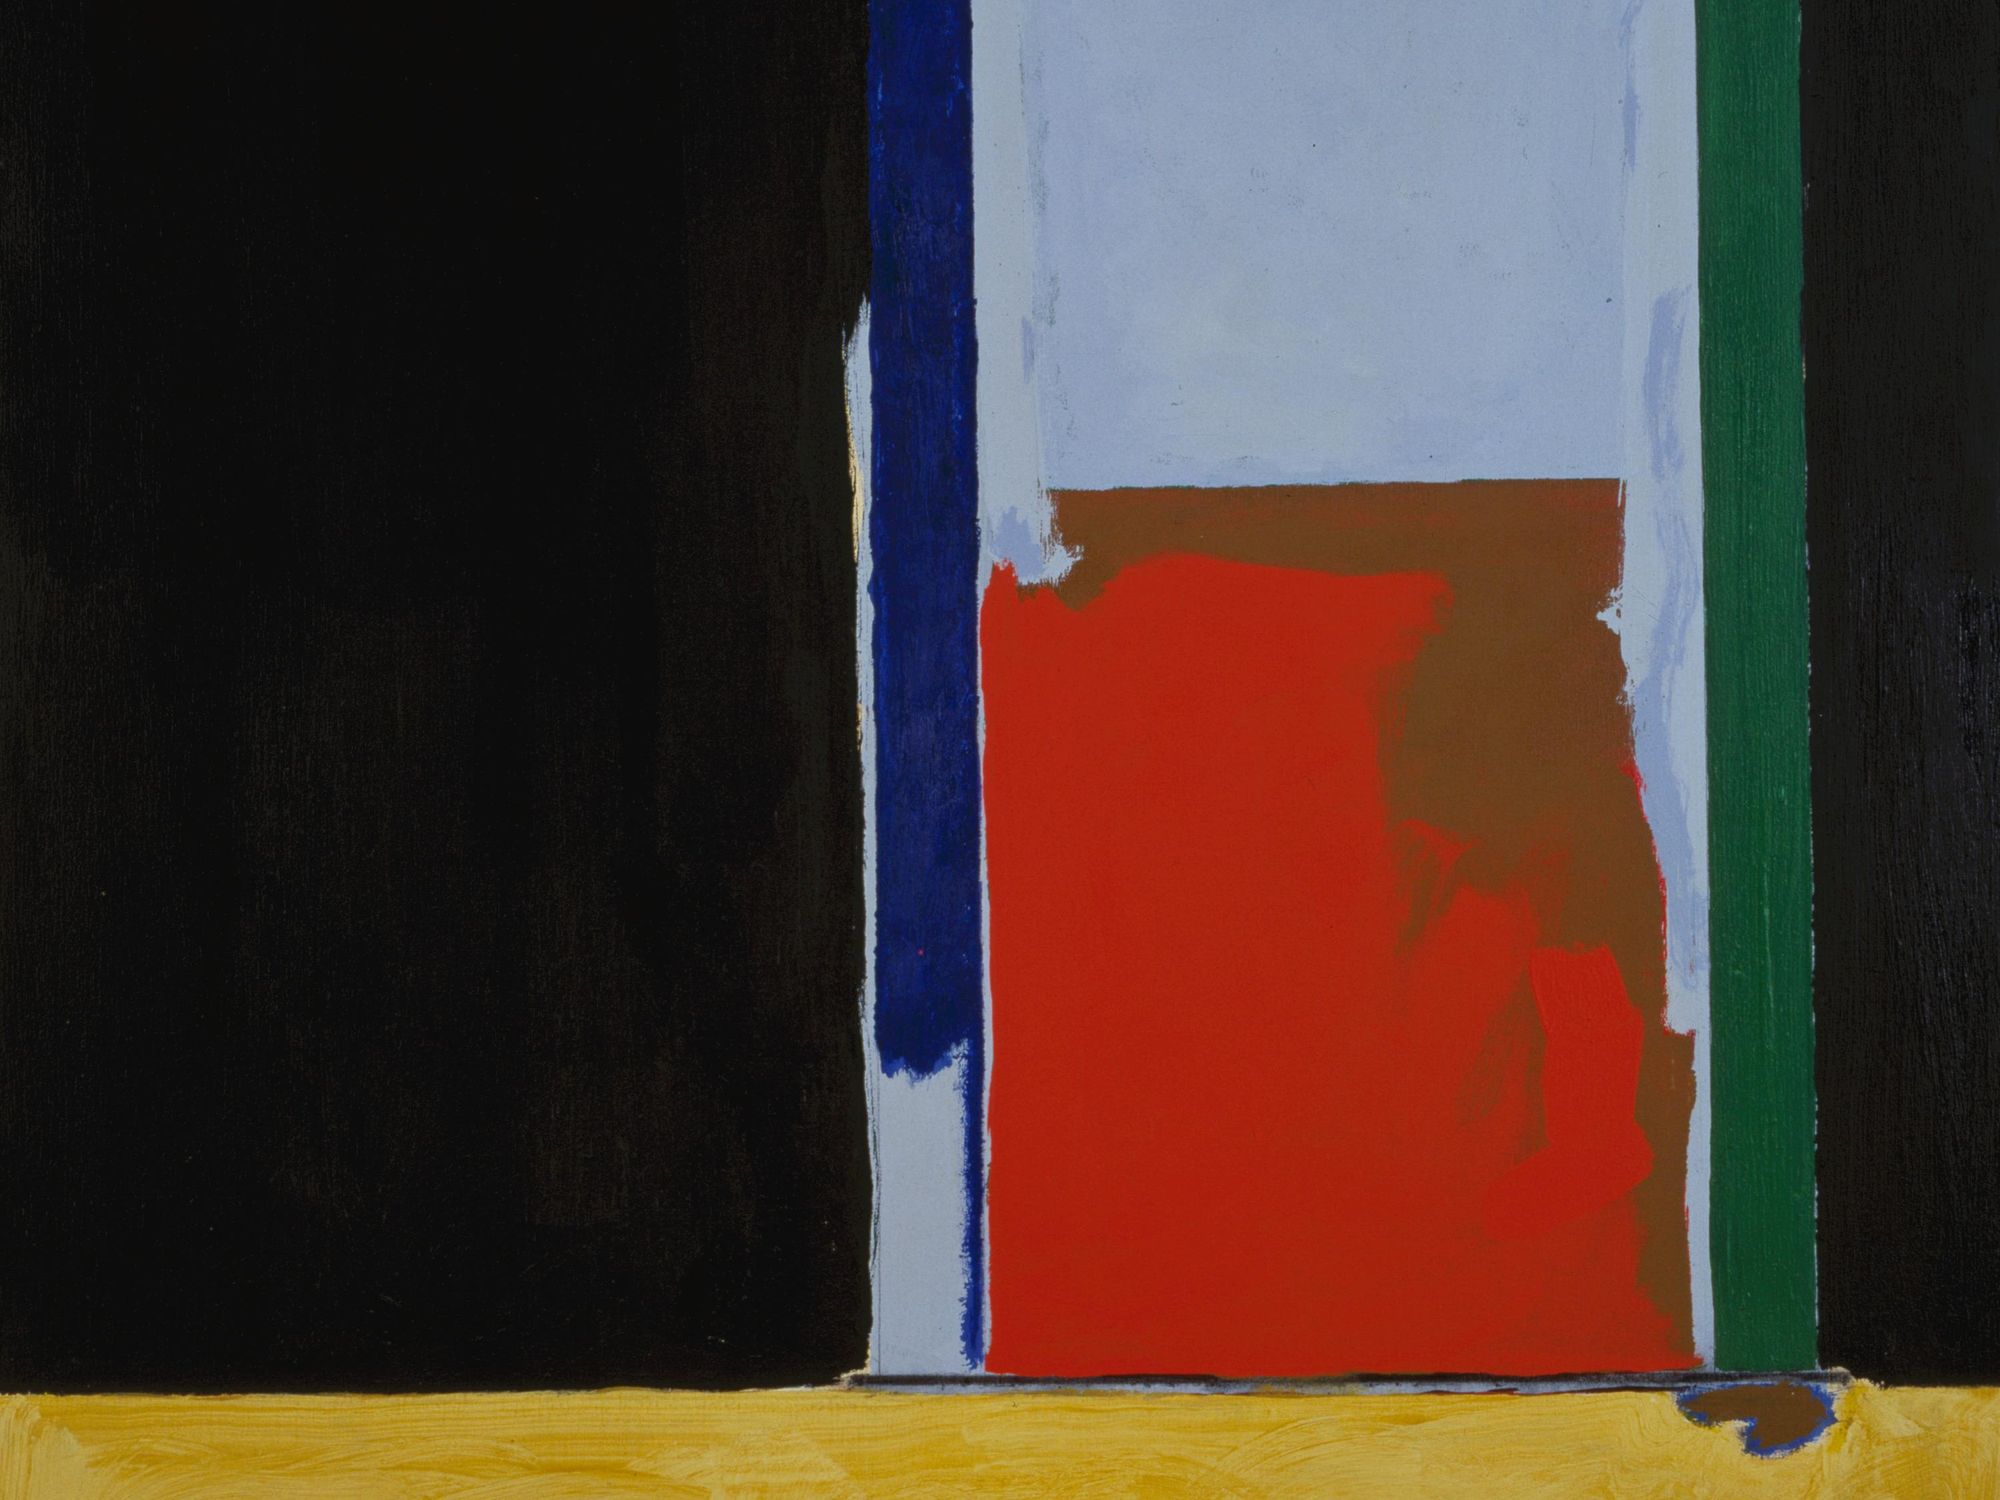 Modern Art Museum of Fort Worth presents Robert Motherwell: "Pure Painting"